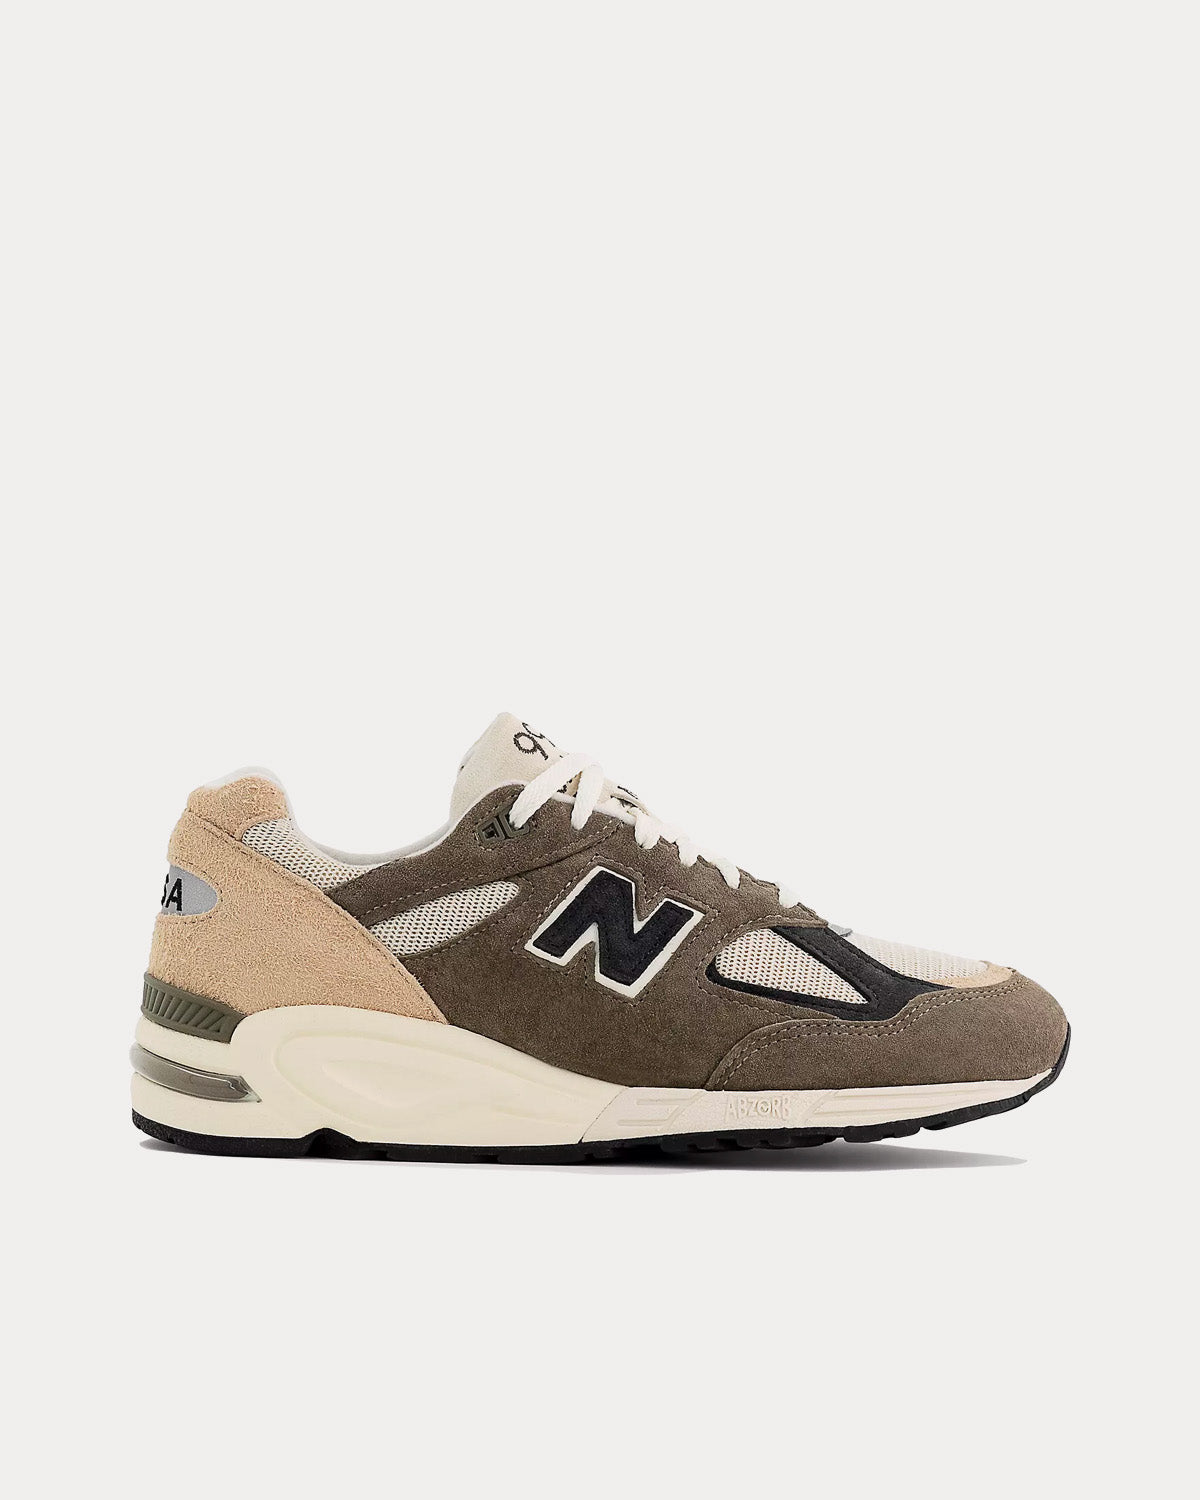 New Balance Made in USA 990v2 Grey / Tan Low Top Sneakers - Sneak ...